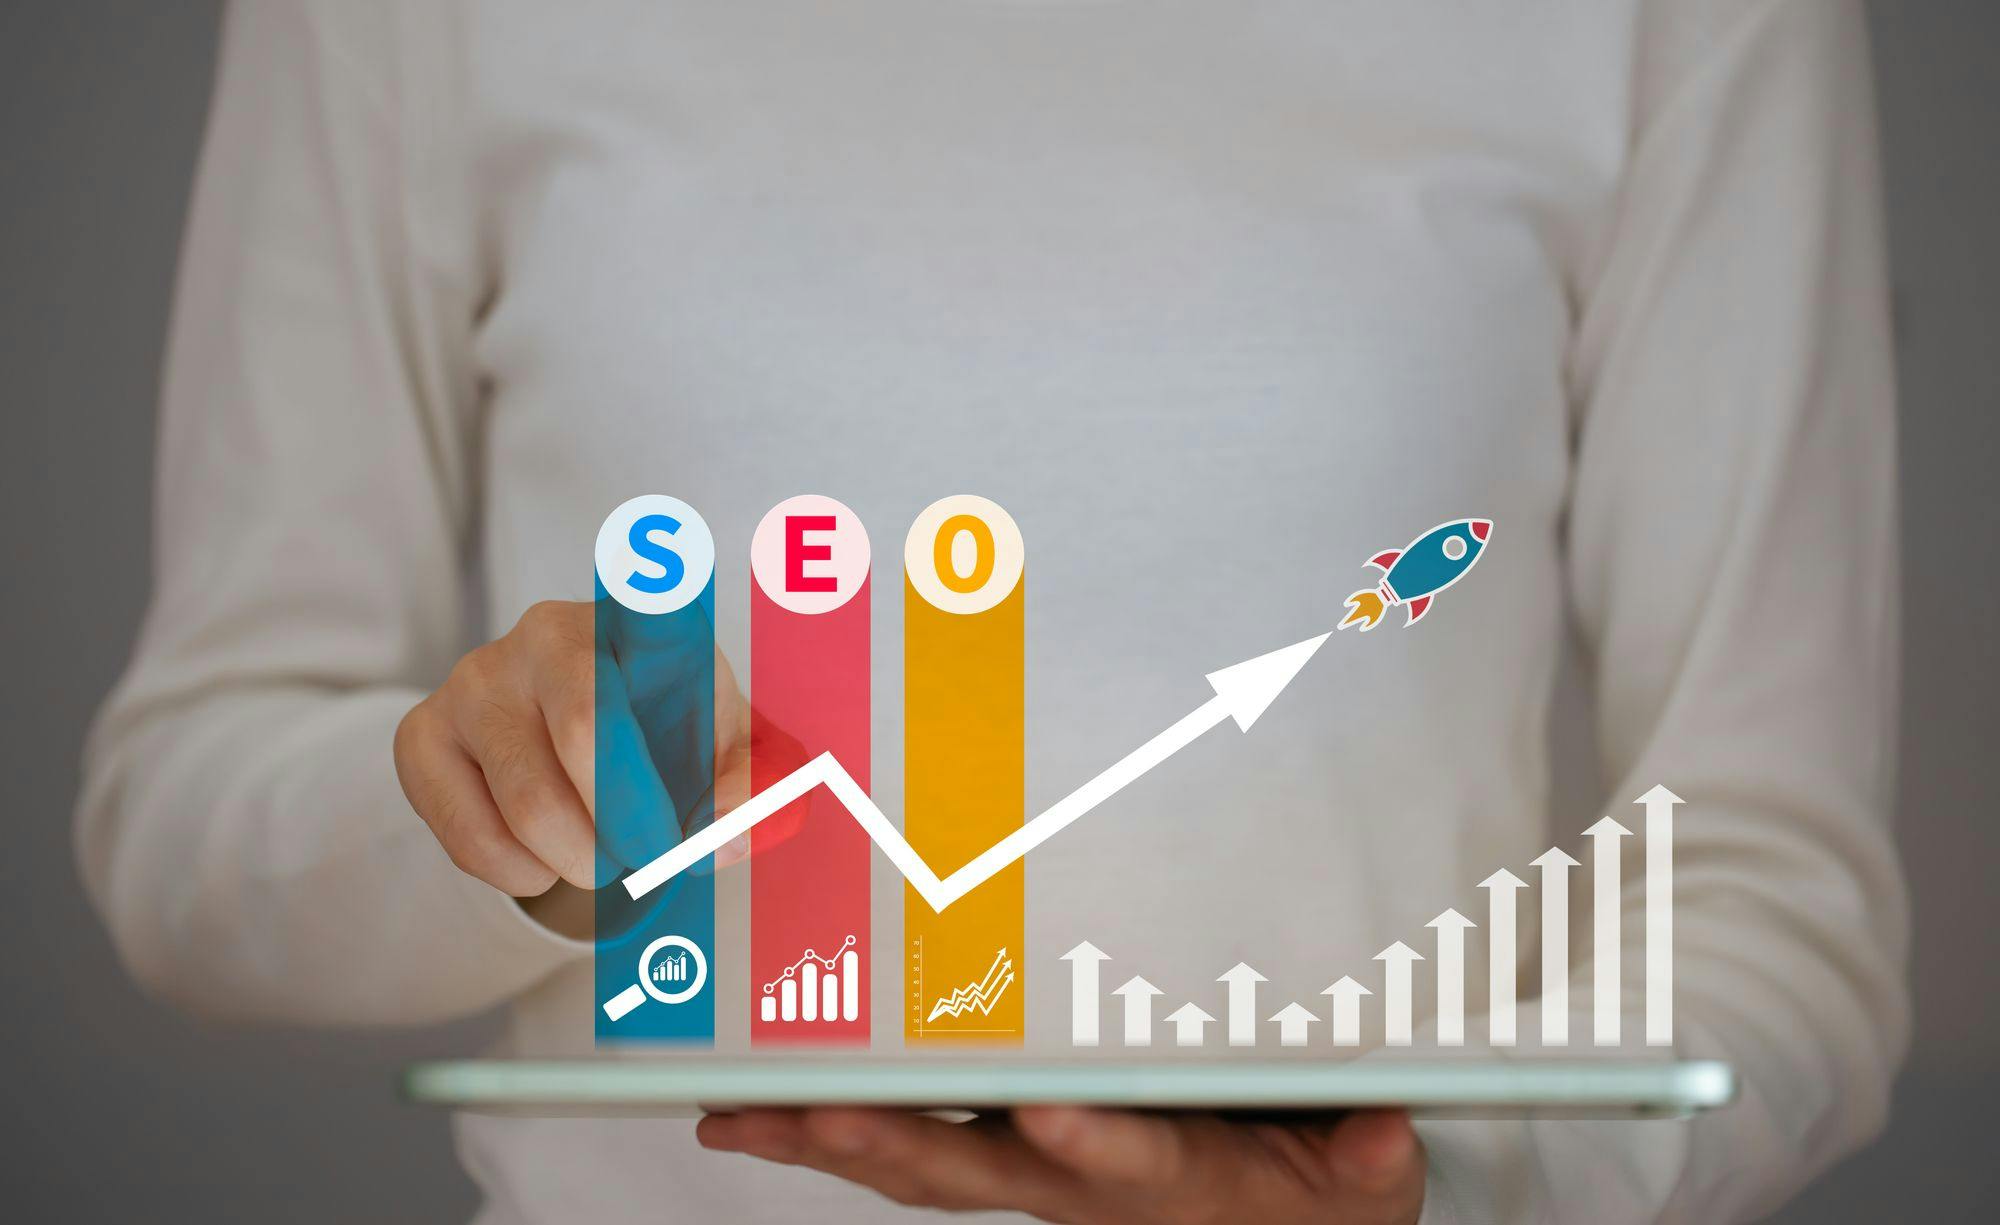 Get up to speed on SEO basics and find out why investing in SEO can be the key to success for your business. Total Care Websites can help businesses reach their growth goals.